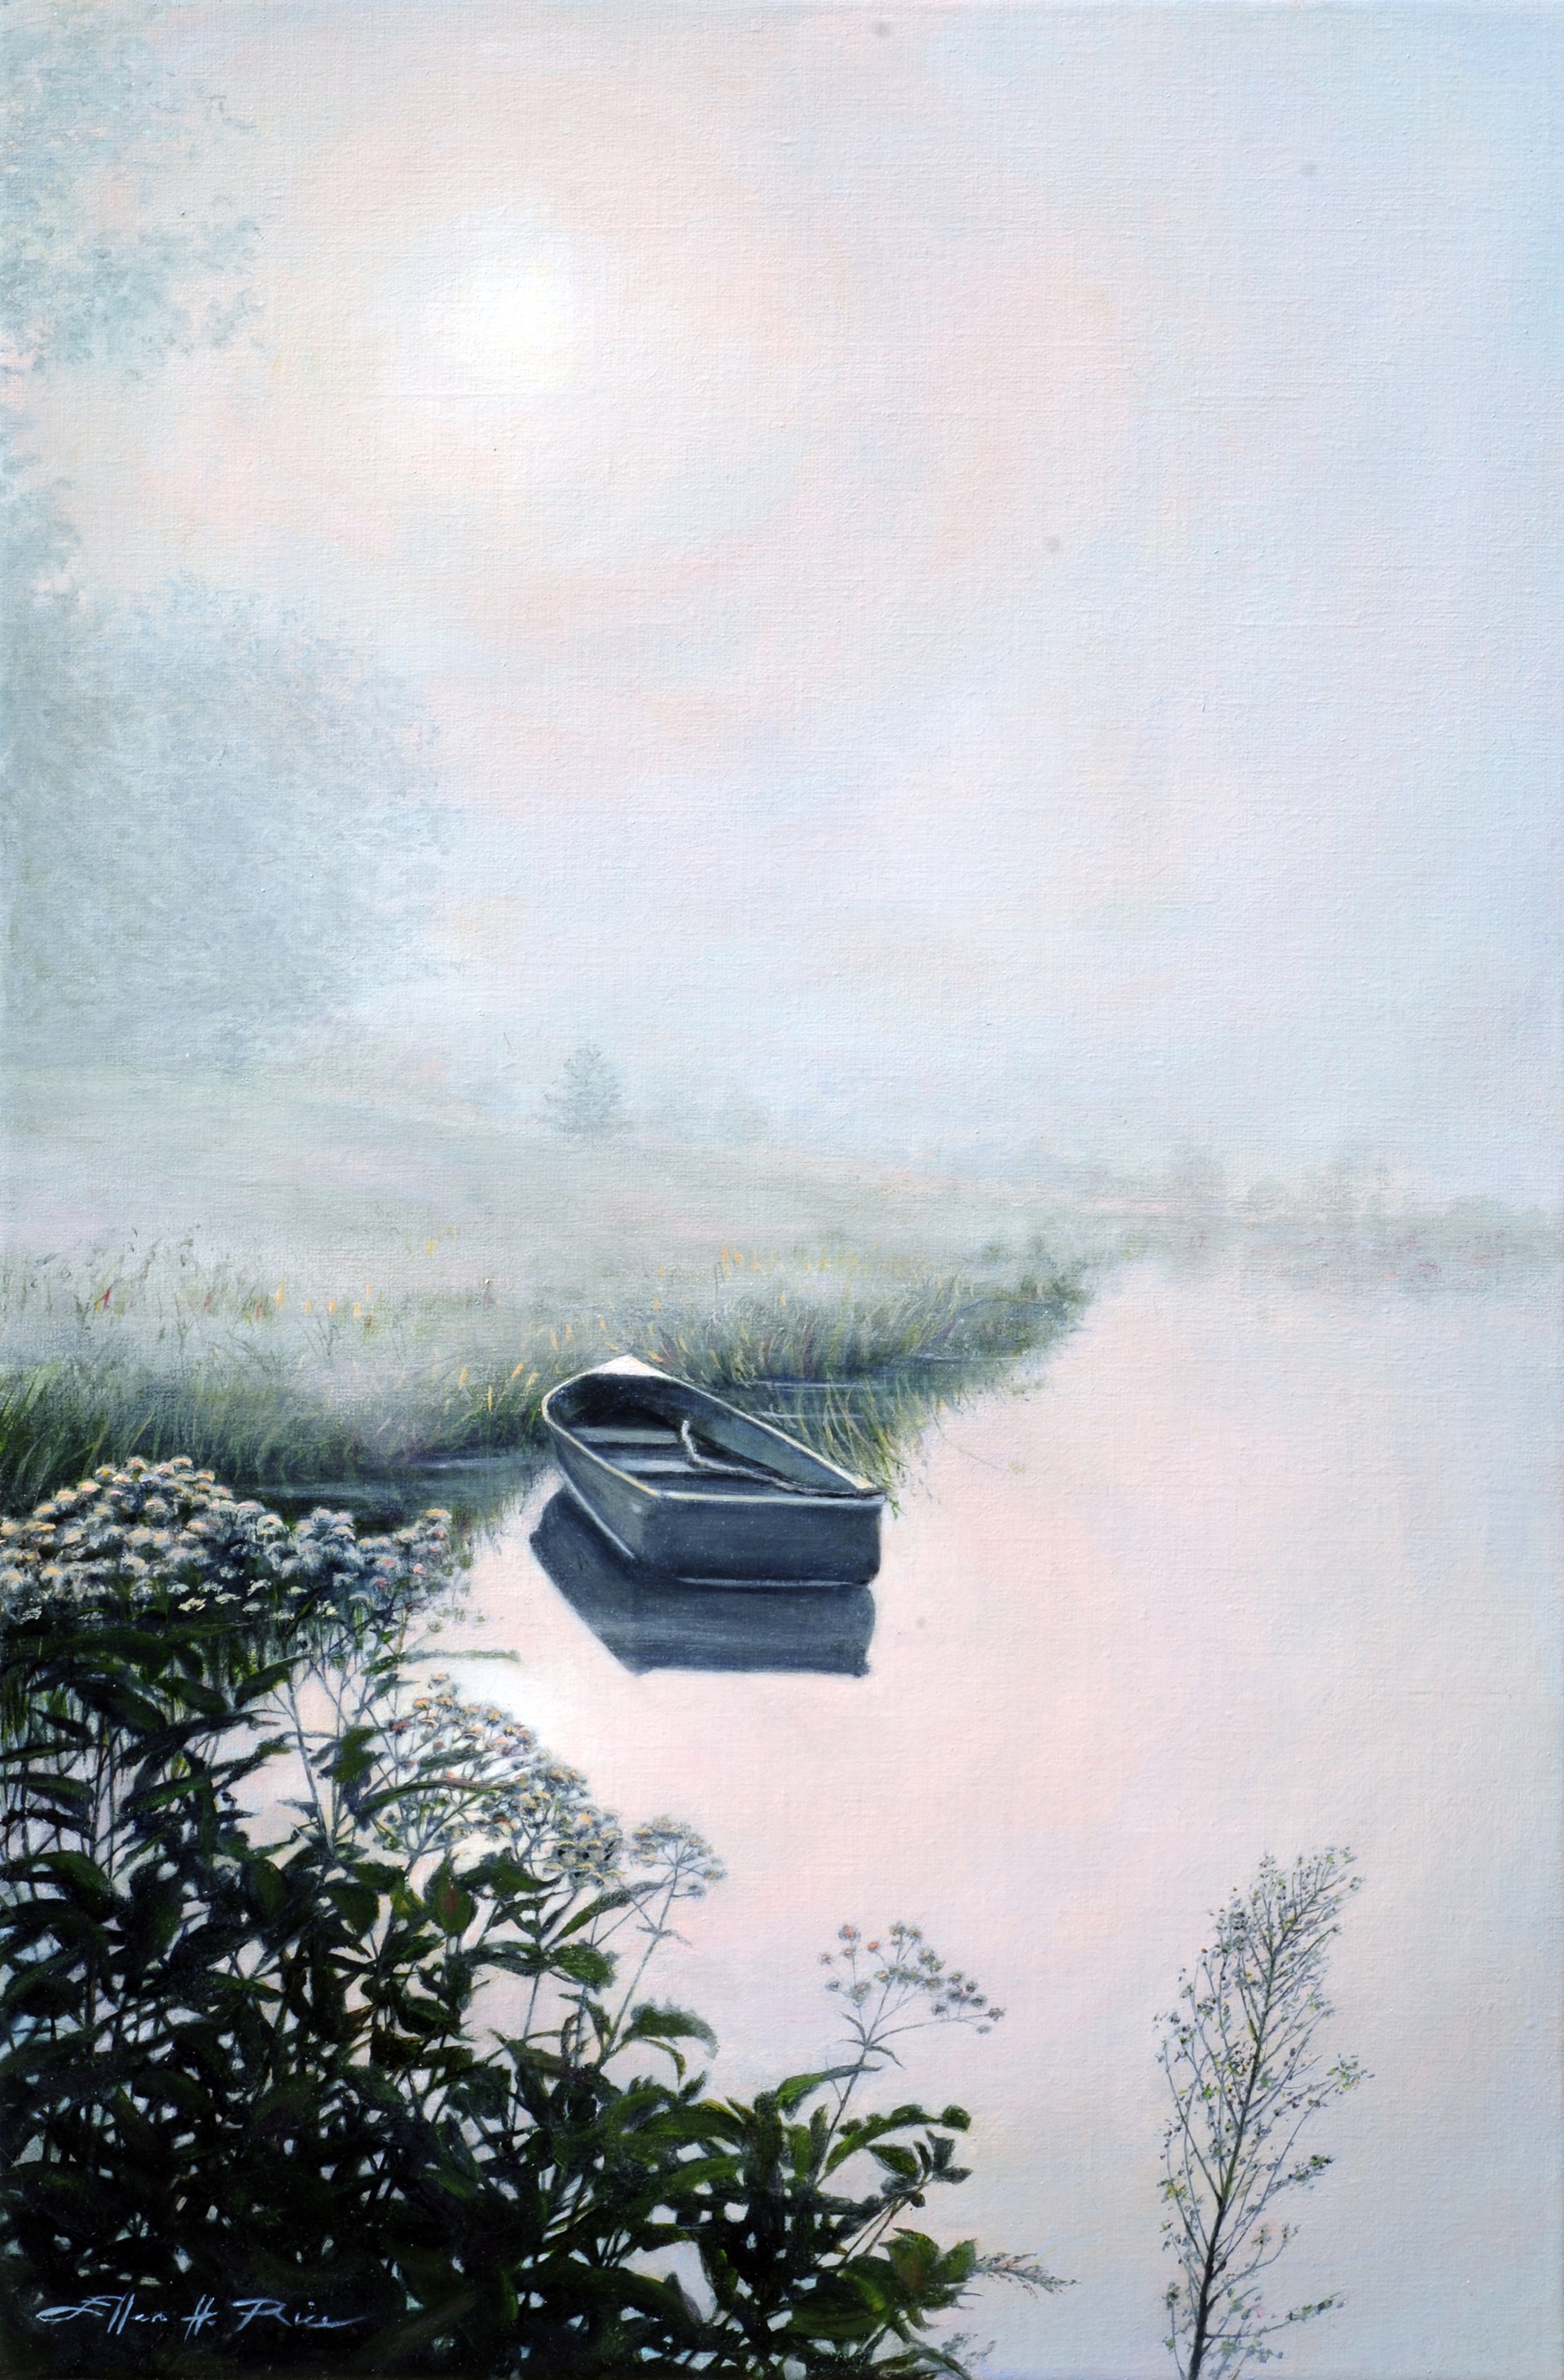 Moored in the Mist by Ellen Rice